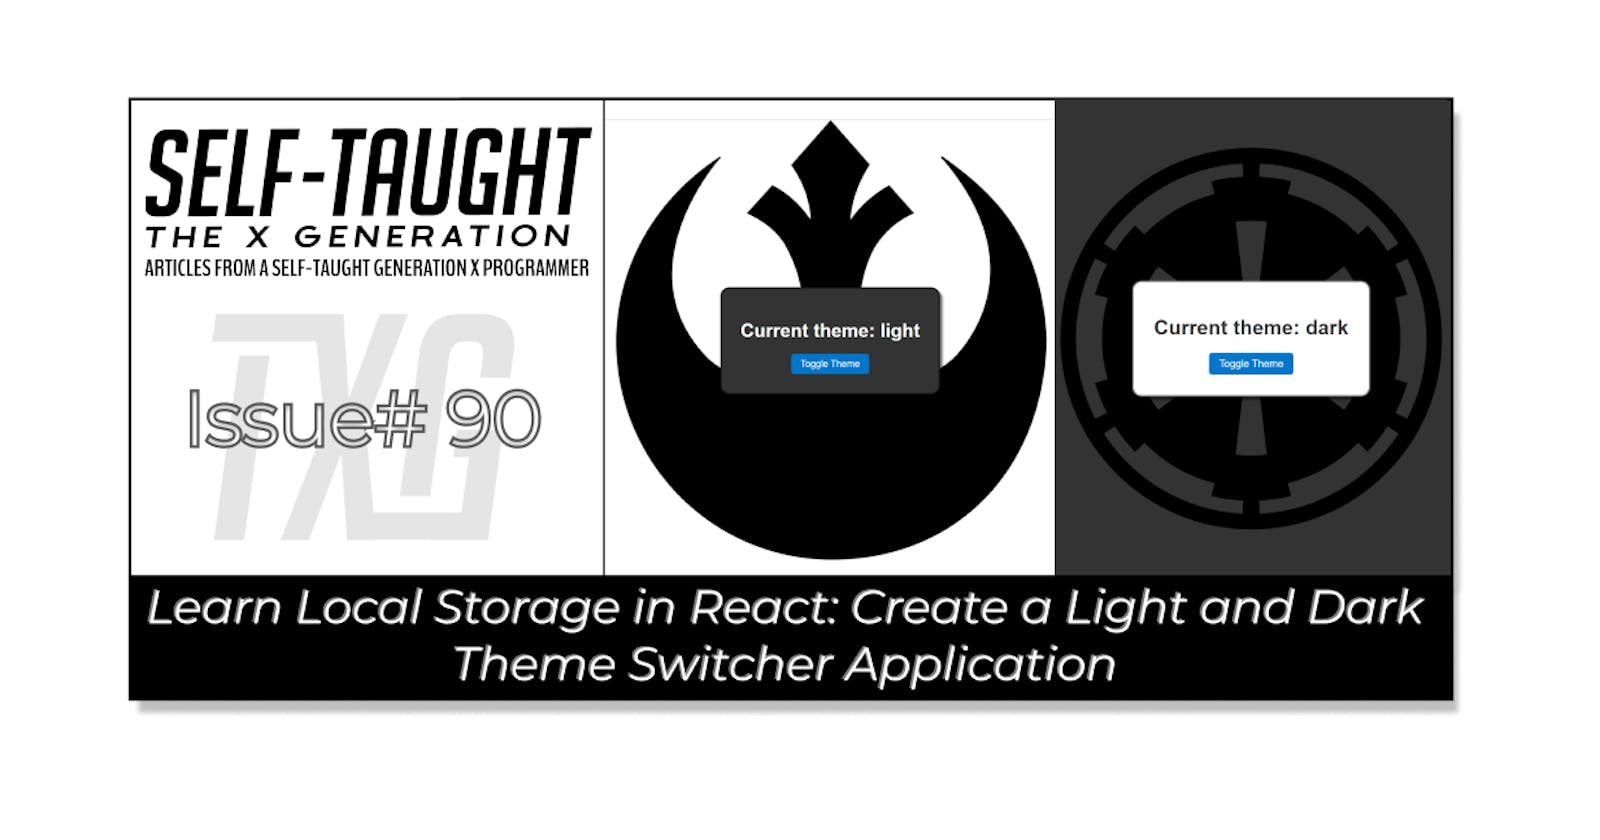 Learn Local Storage in React: Create a Light and Dark Theme Switcher Application